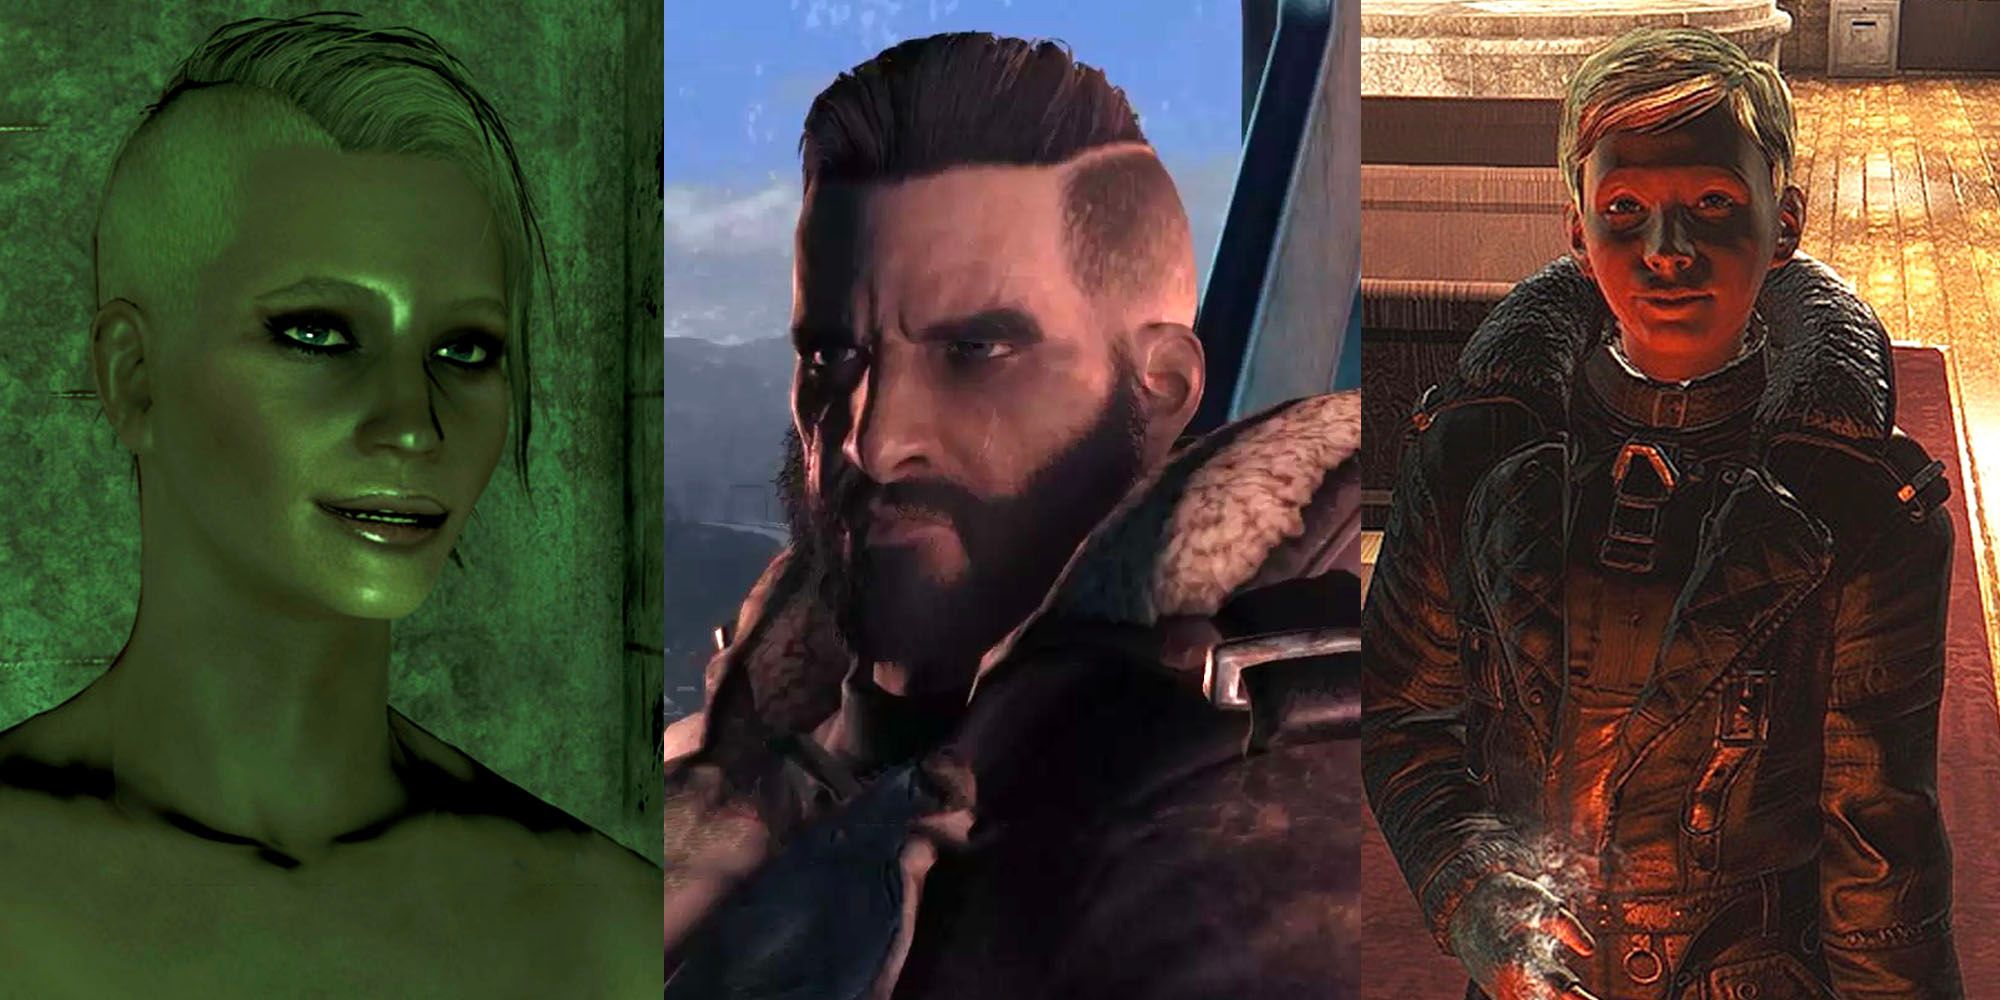 Some of the characters featured in Bathesda's Fallout 4.